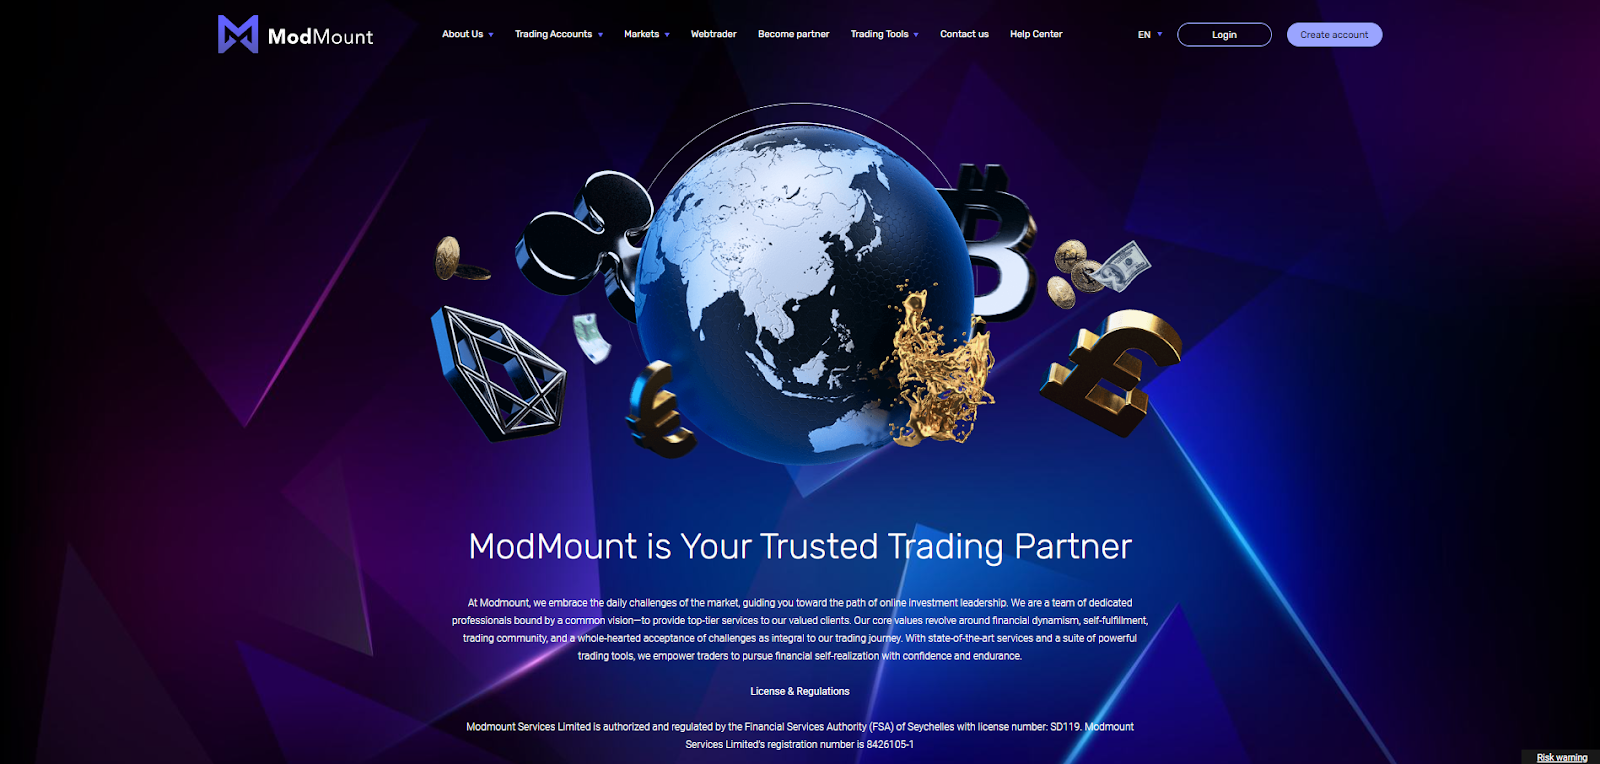 Read more about ModMount’s Regulation and Safety Measures on their website